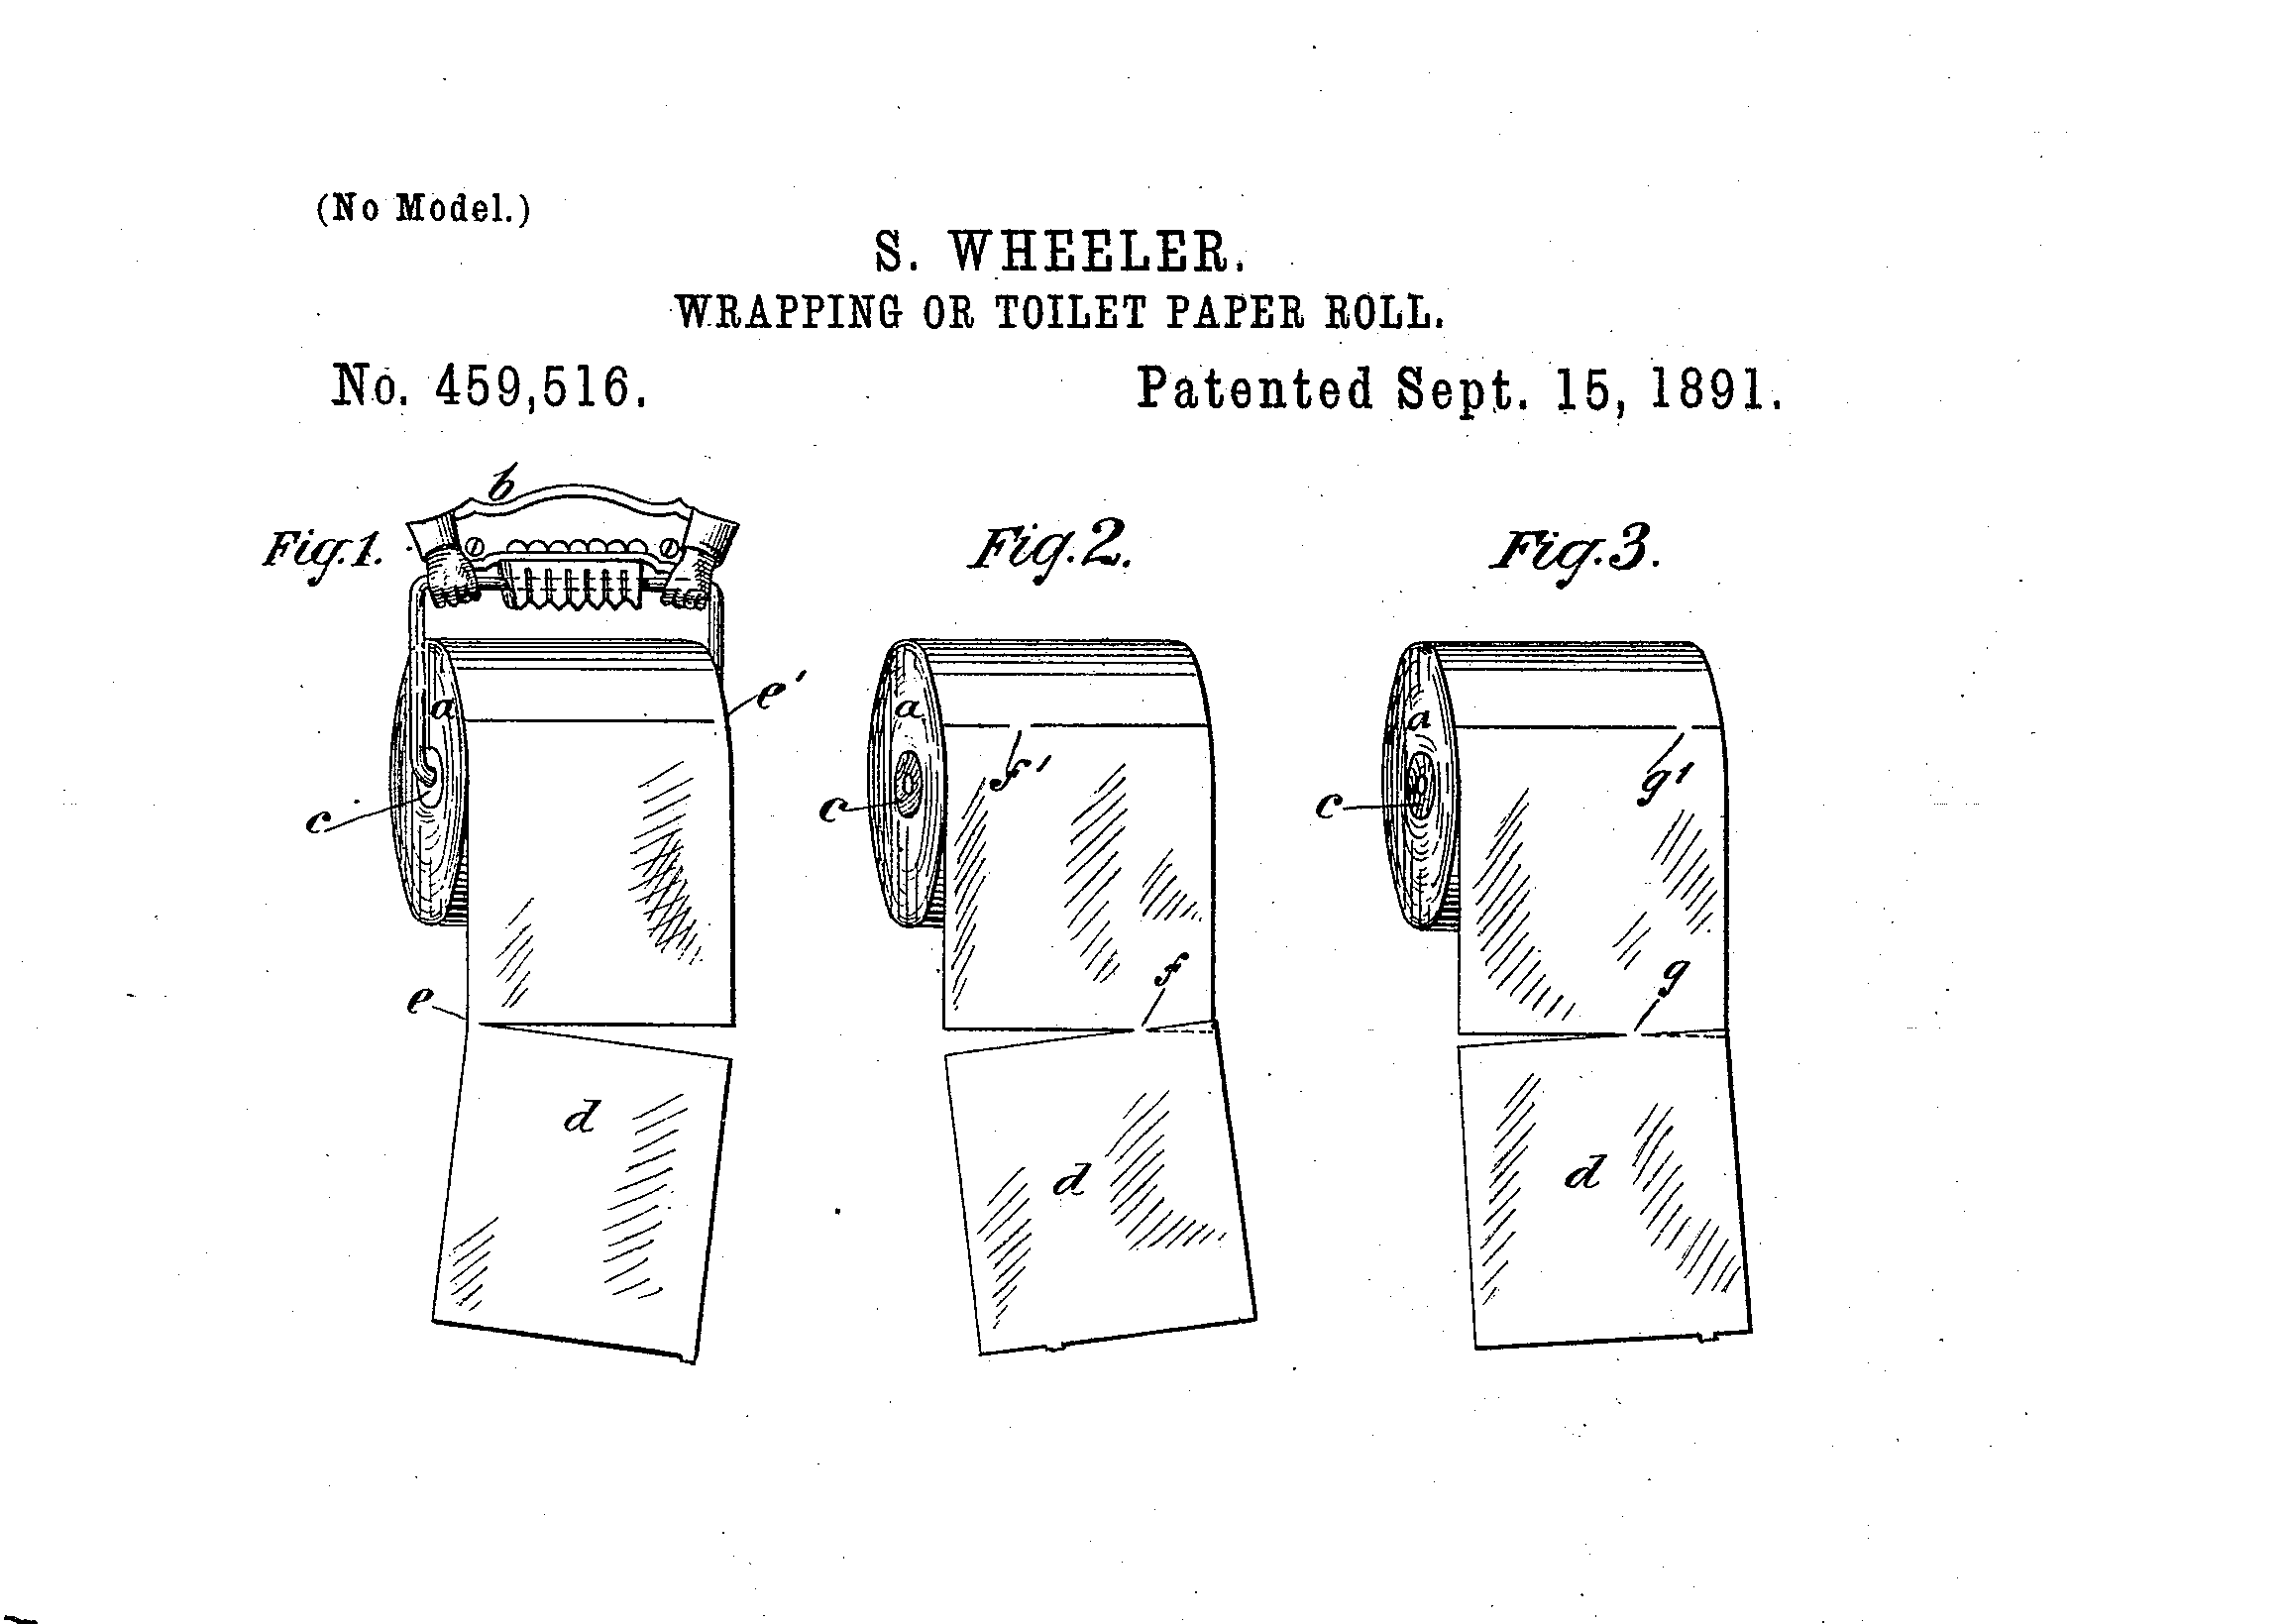 Original Patent For Perforated Toilet Paper On A Roll Solves Over Vs. Under Debate Once And For All